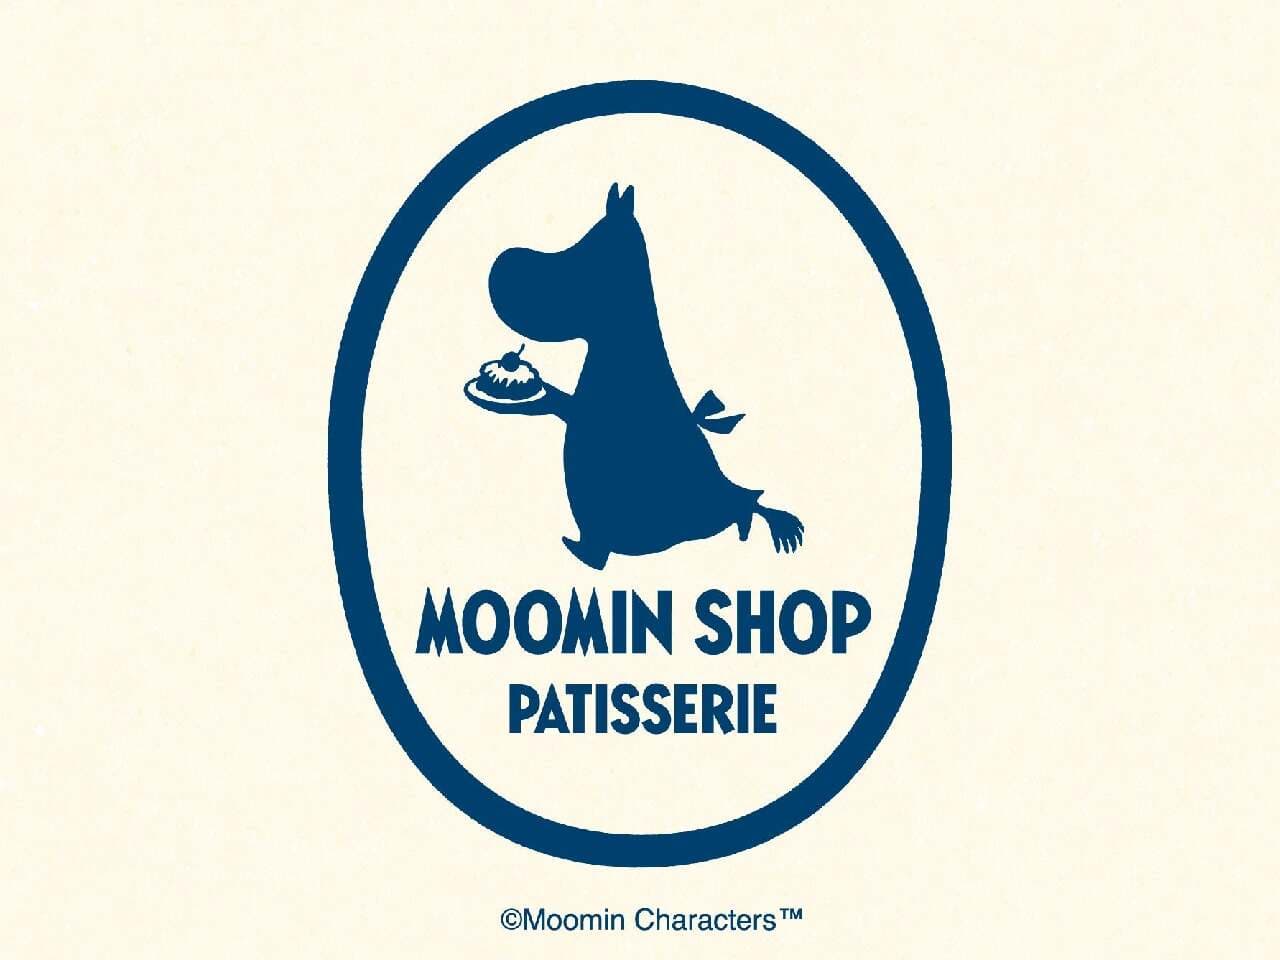 Moomin Shop Patisserie, courtesy of Grapestone, to appear in Yokohama for a limited time only, from April 23 to May 6, 2023 at Sogo Yokohama Store Image 2